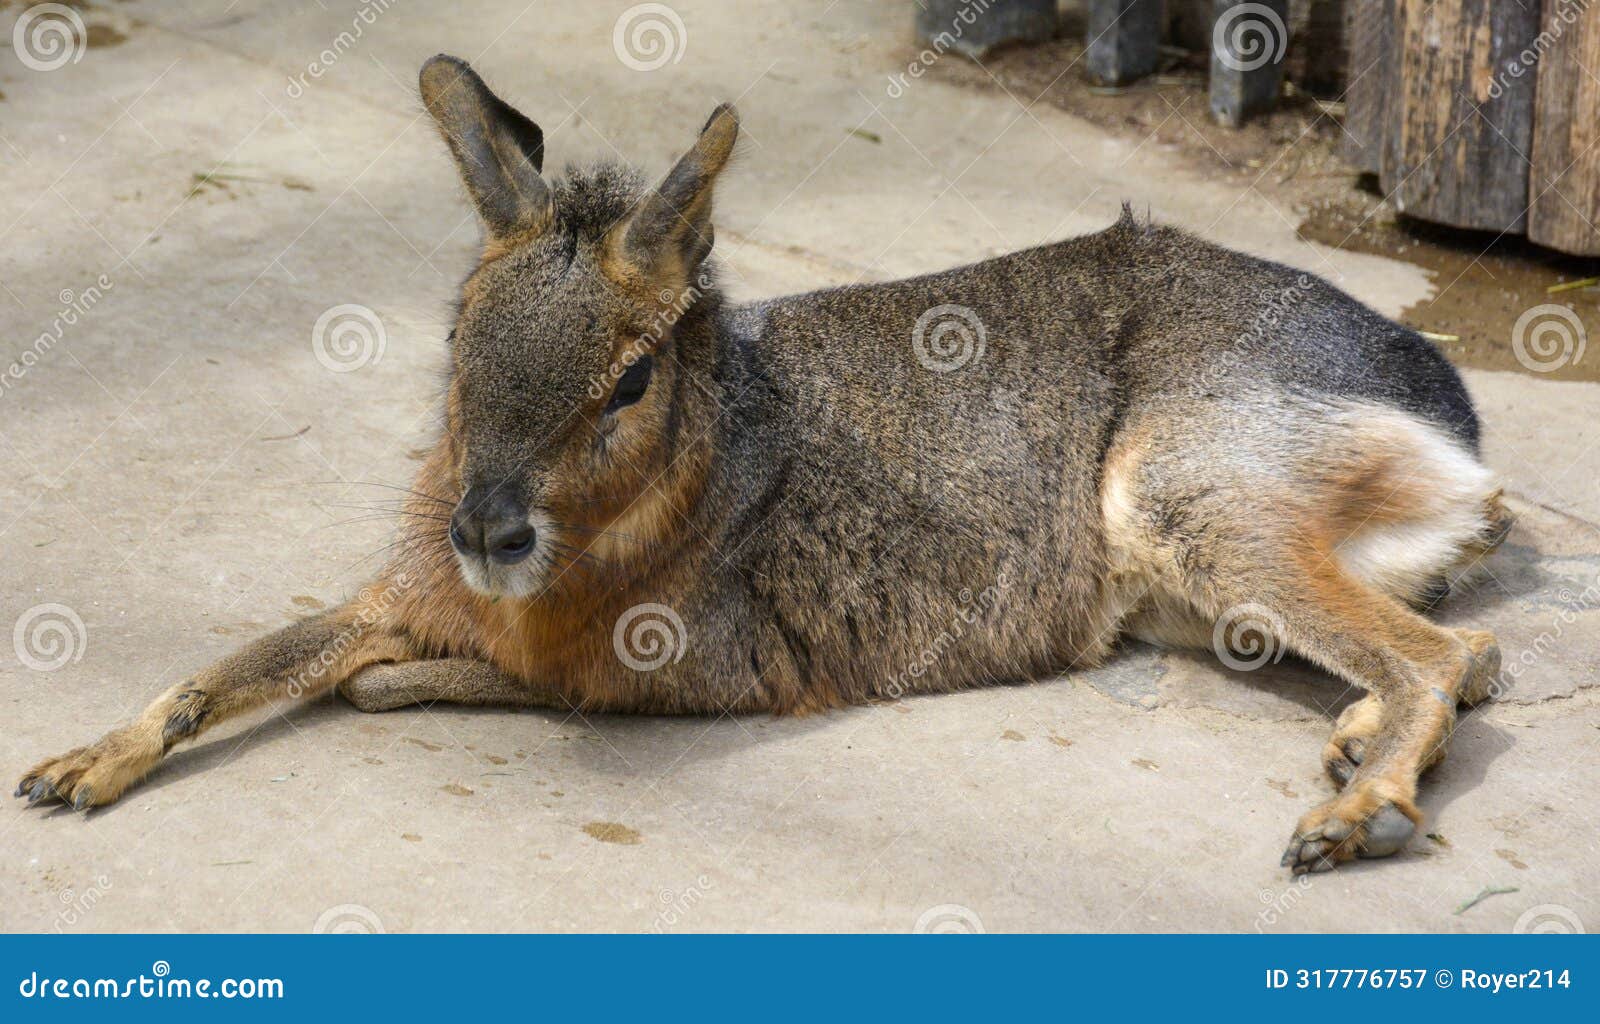 patagonian cavy